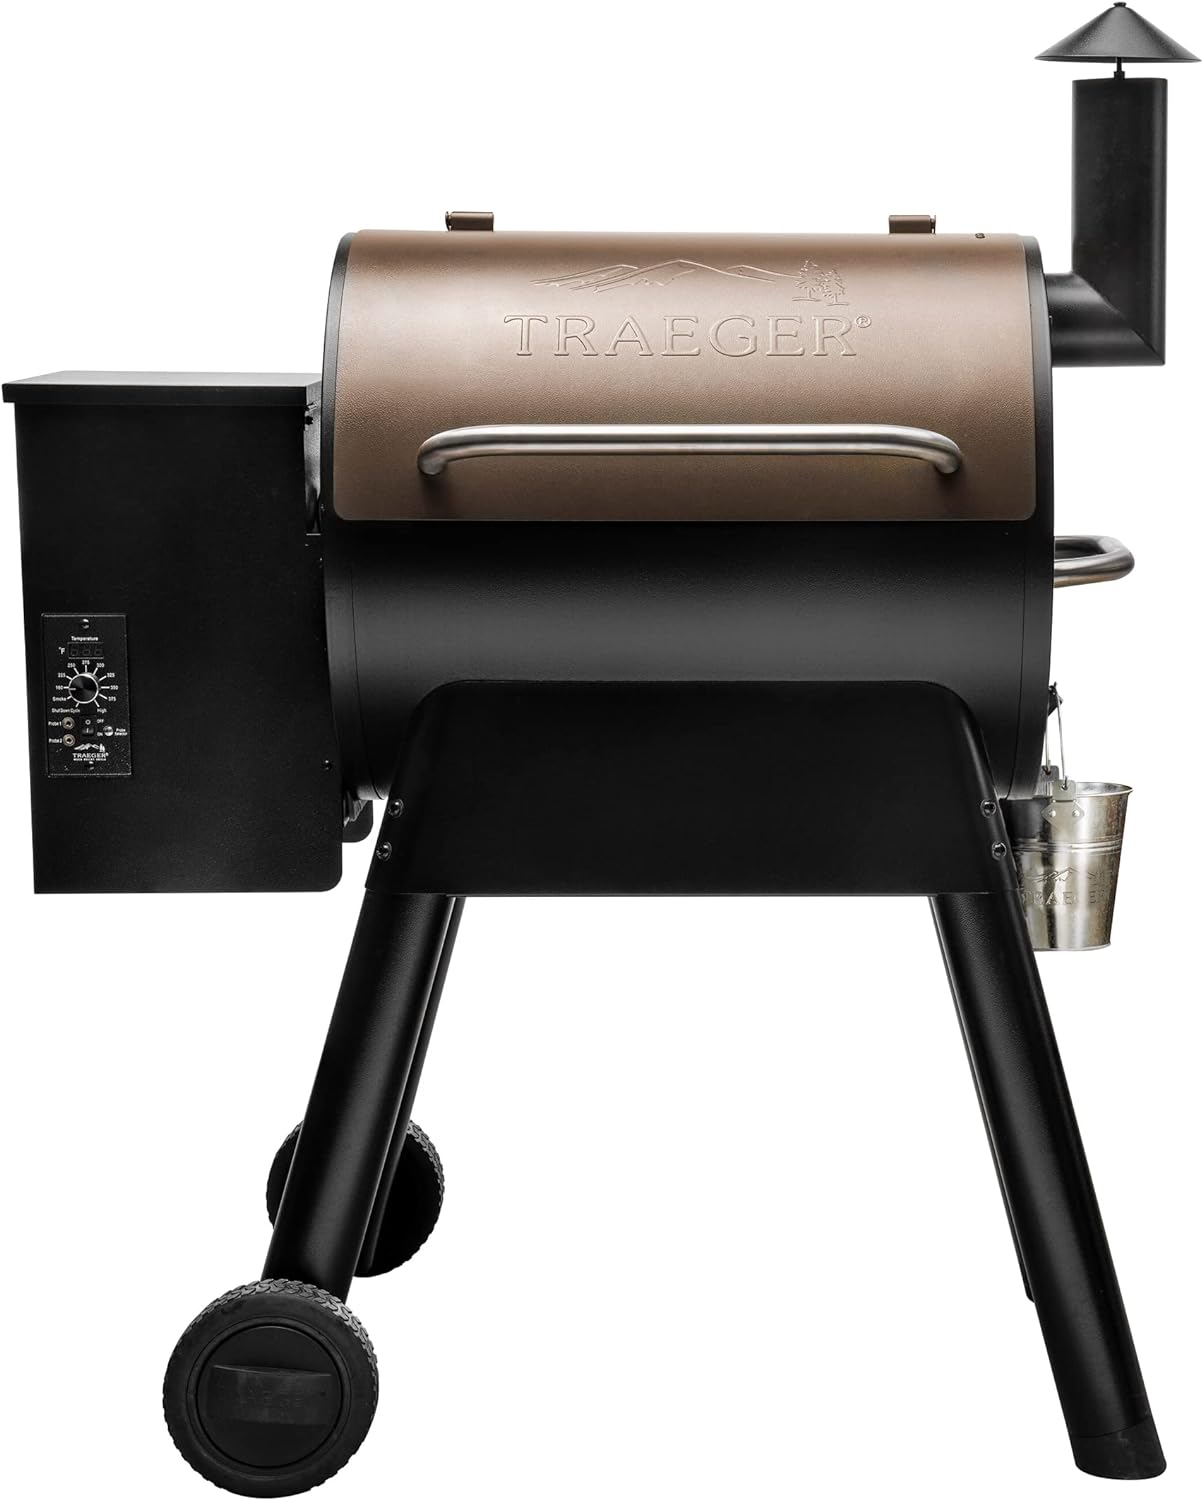 New Open Box - Traeger Grills Pro Series 22 Electric Wood Pellet Grill and Smoker, Bronze - Retail $599